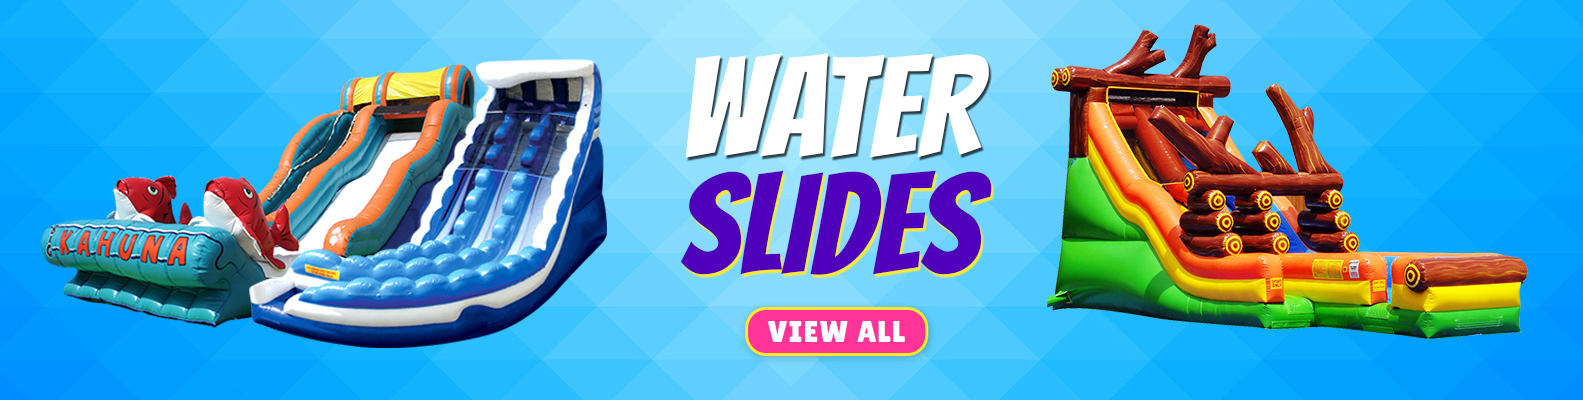 inflatable water slide rentals in Paradise Valley